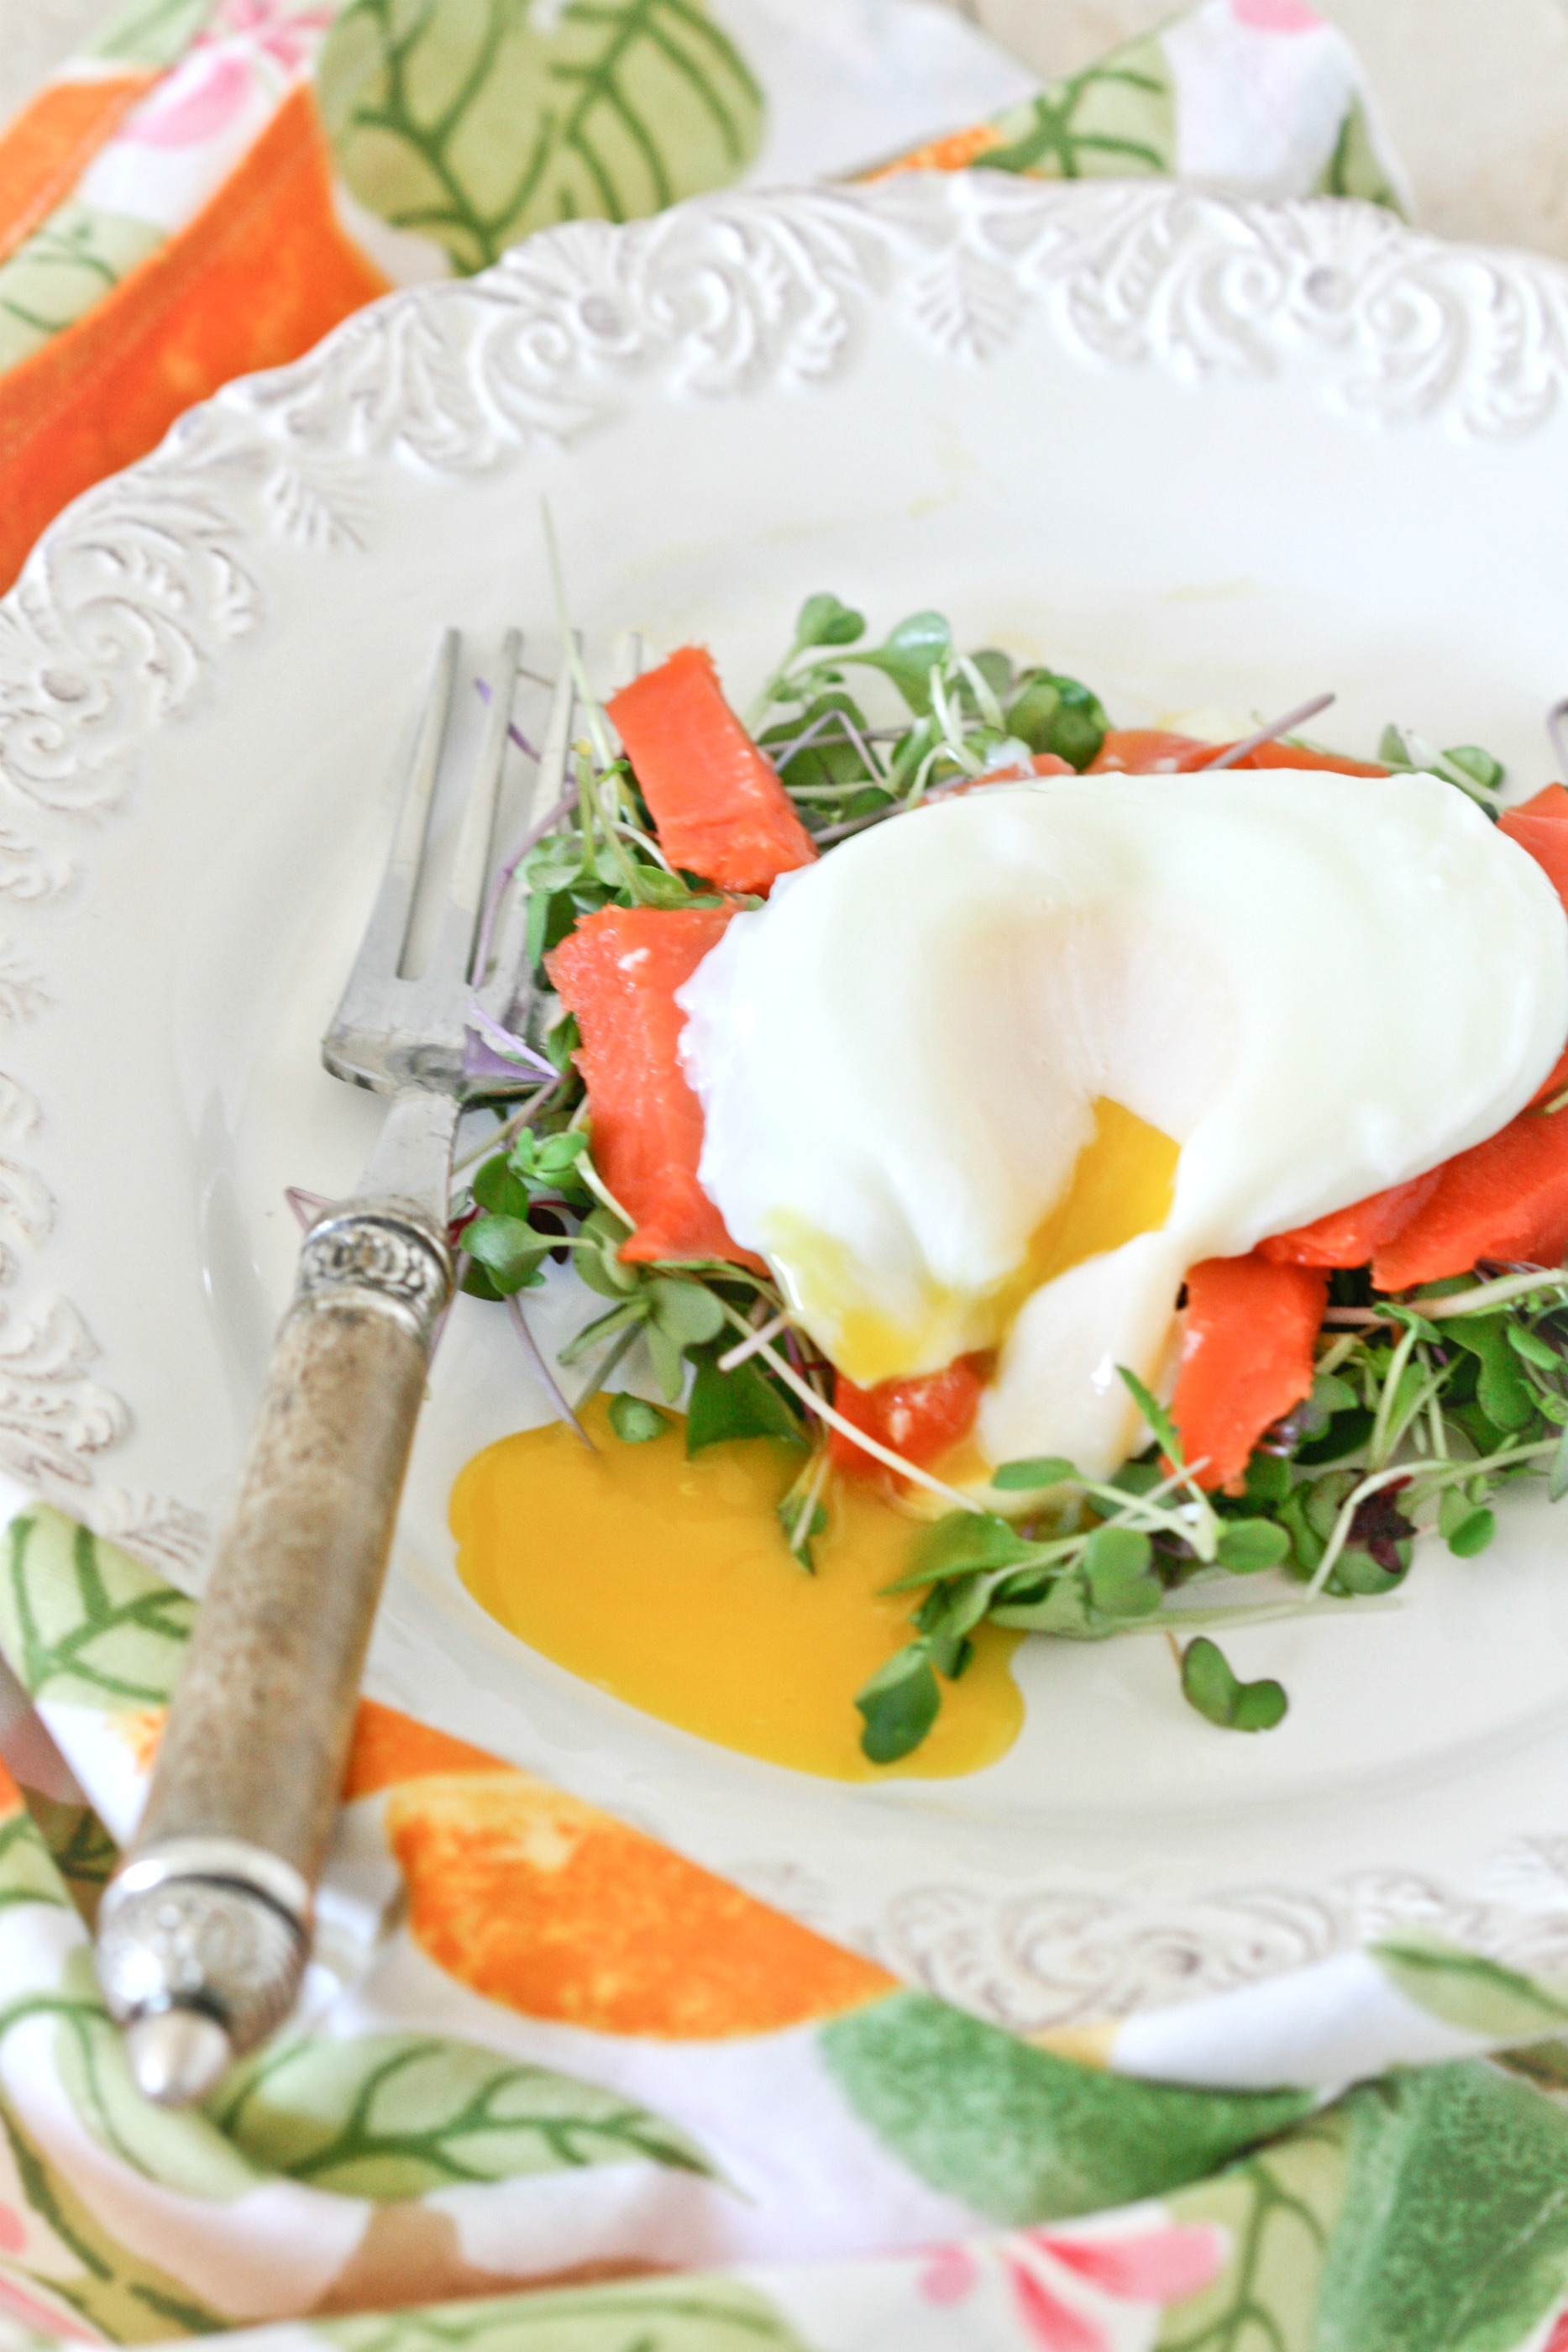 Smoked Salmon, Poached Eggs and Micro Greens - Deliciously Organic